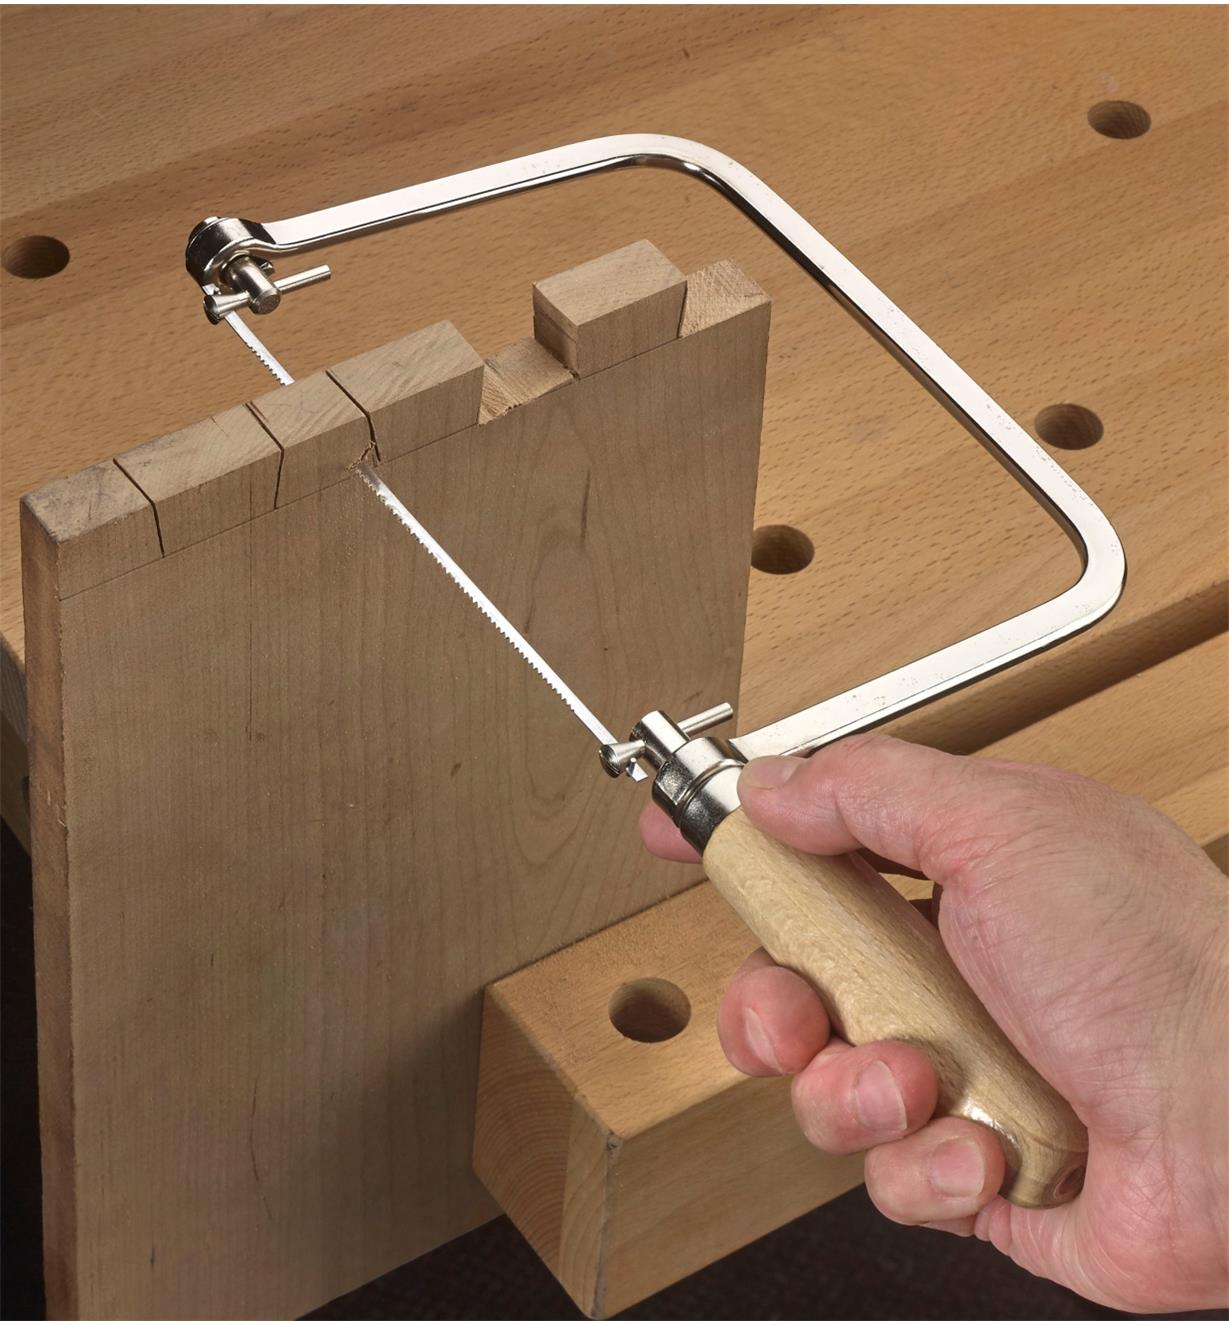 Cutting dovetails with a coping saw